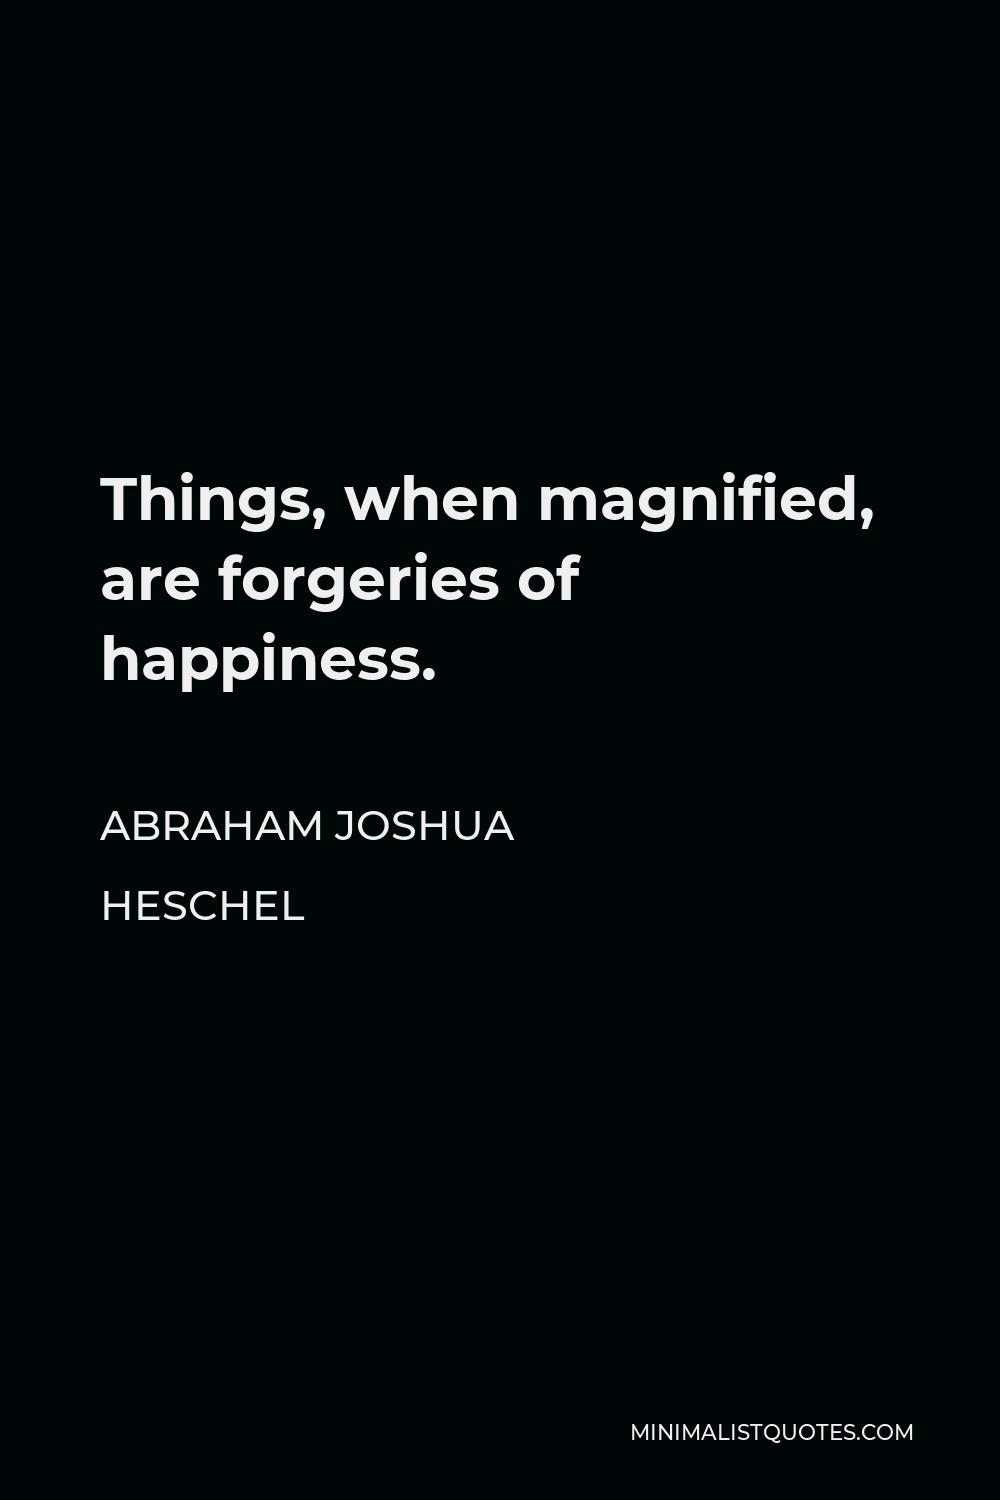 Abraham Joshua Heschel Quote - Things, when magnified, are forgeries of happiness.